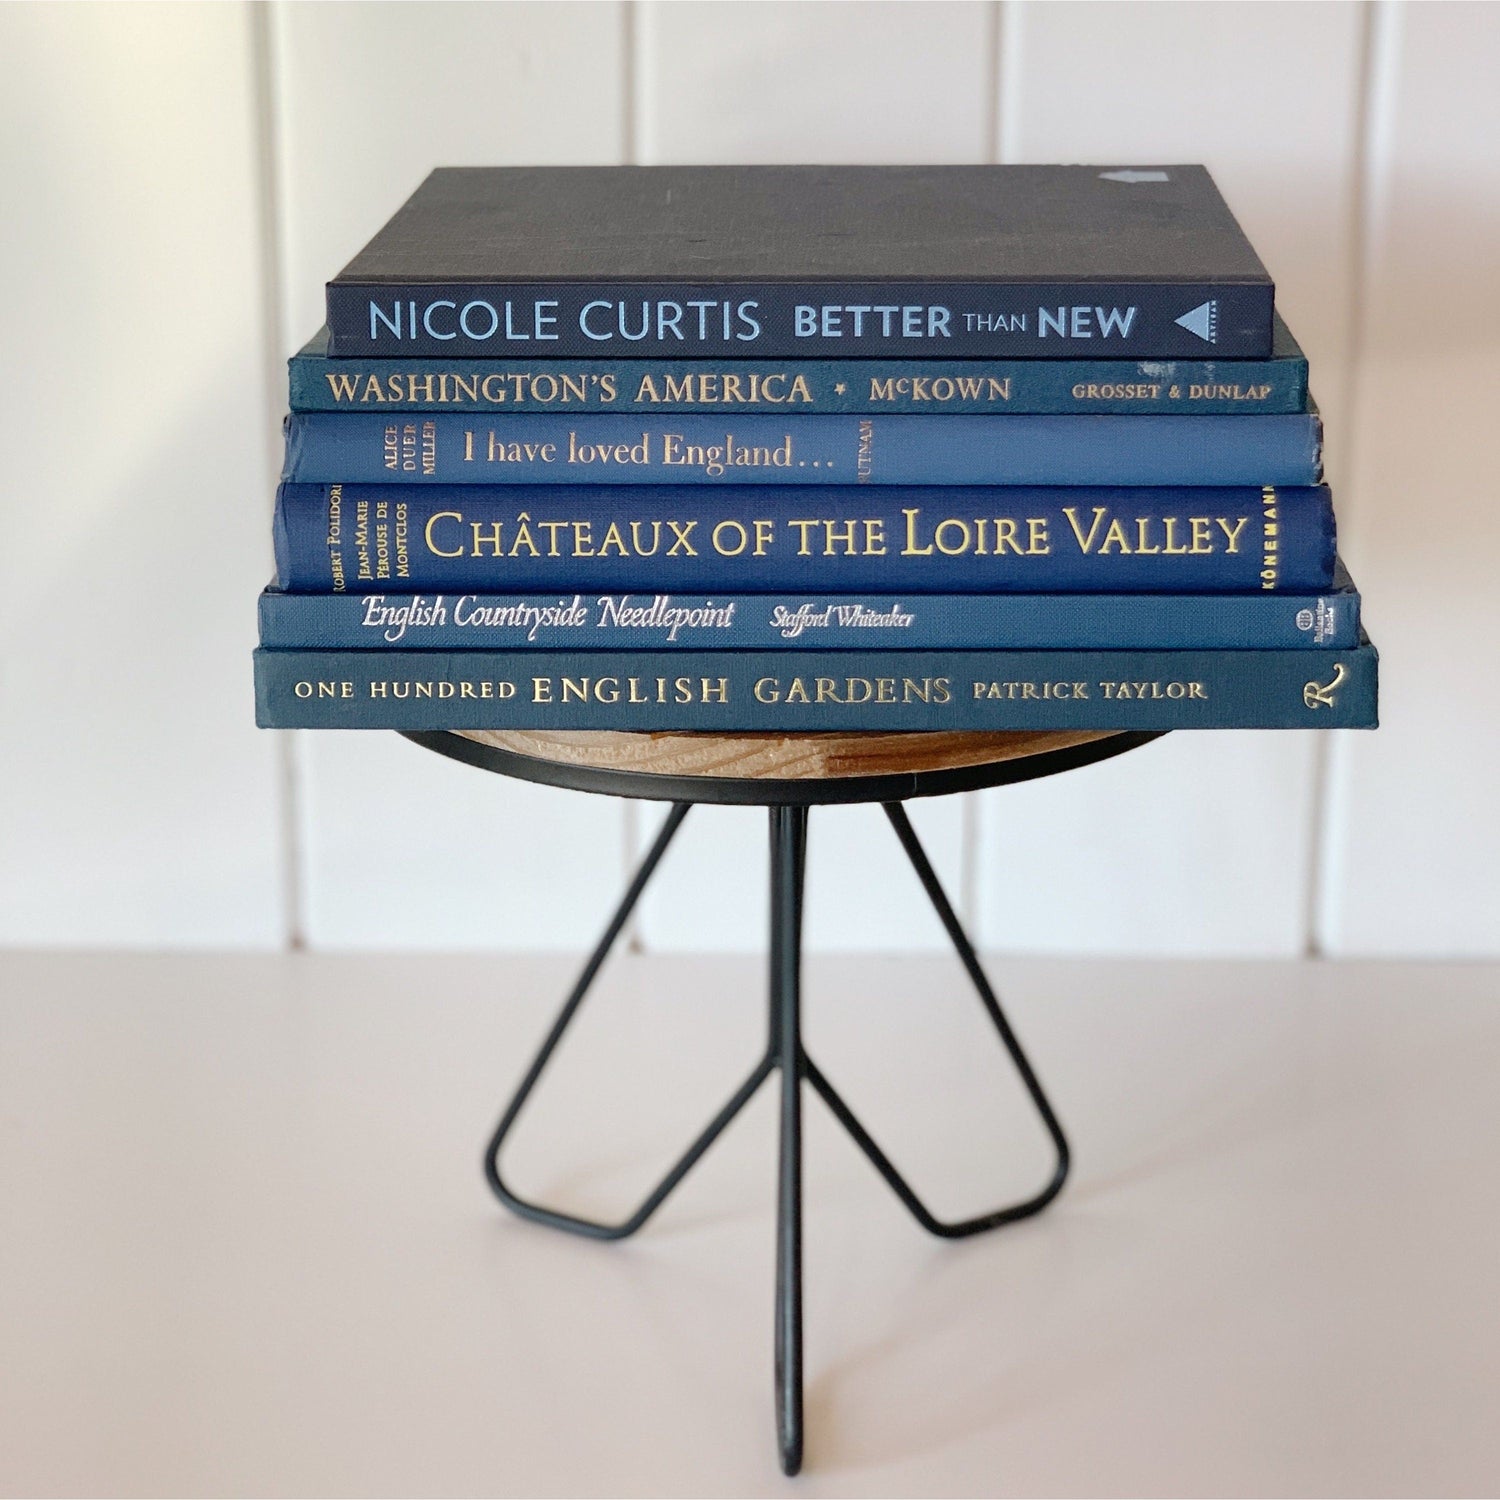 Vintage Blue Coffee Table Books For Decor, Large Book Set for Bookshelf Styling, Home Staging, Farmhouse Decor